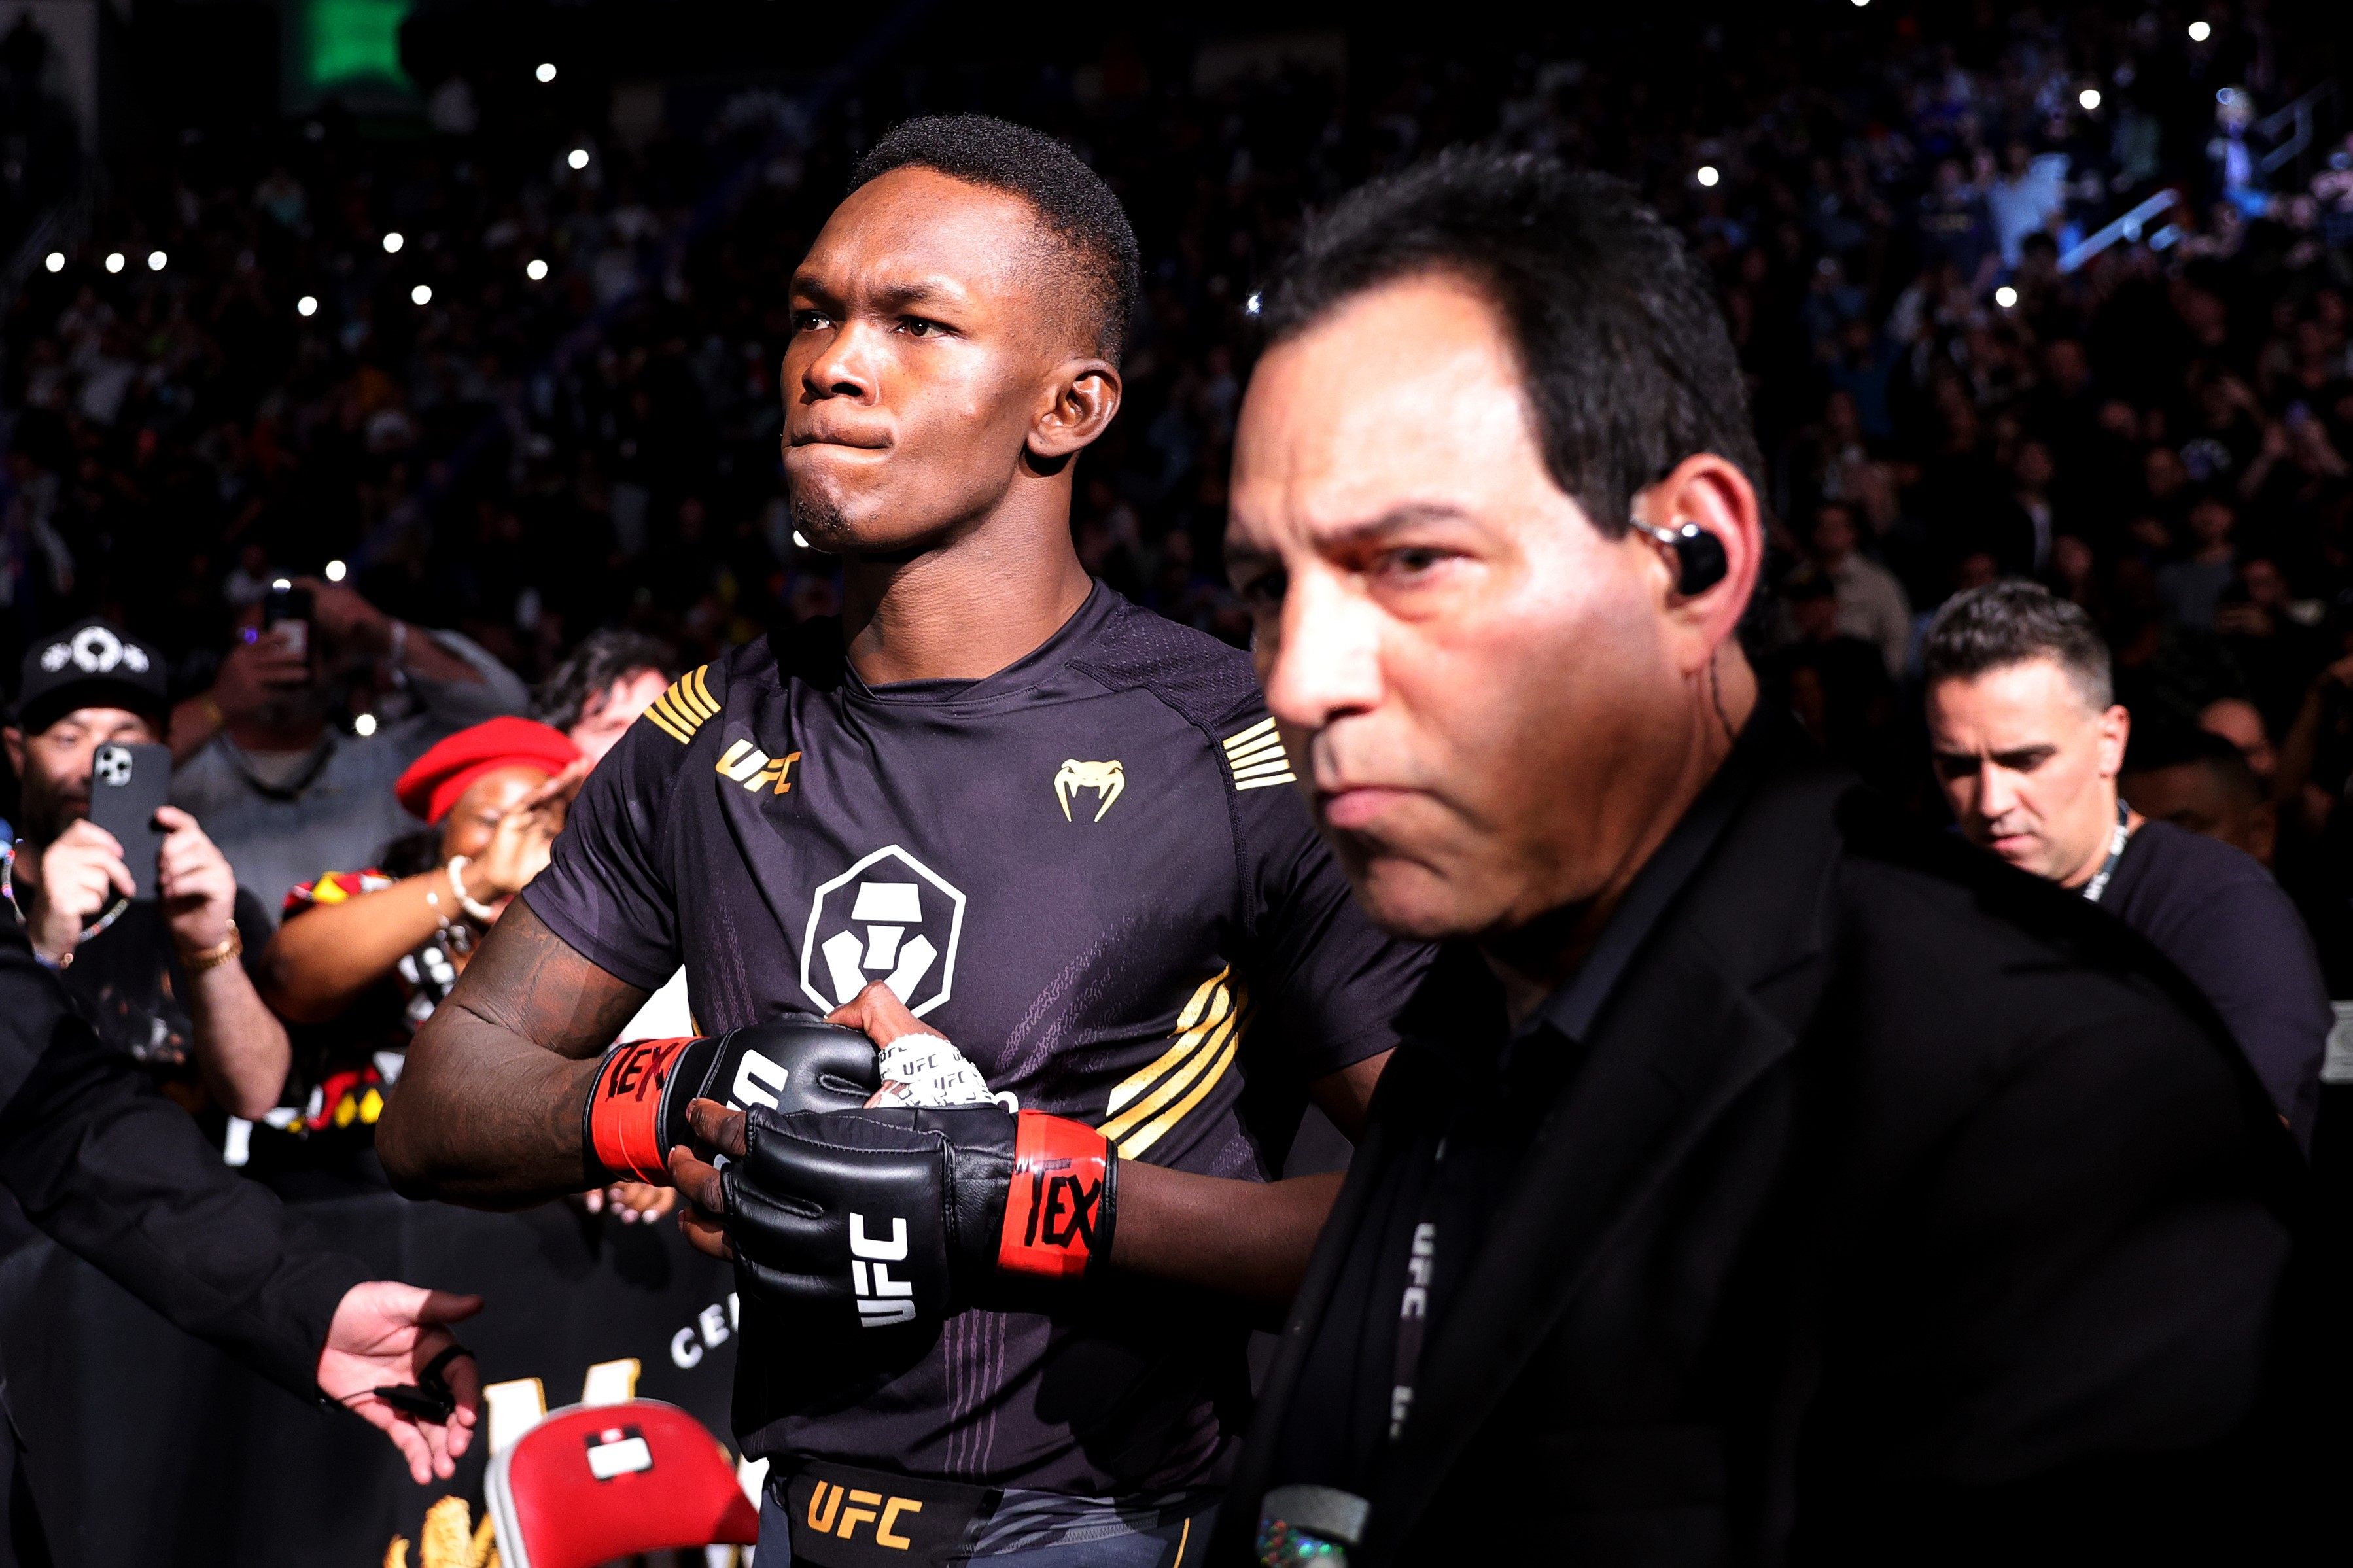 Israel Adesanya of Nigeria enters the octagon for his middleweight championship fight against Robert Whittaker at UFC 271. Photo: Carmen Mandato/Getty Images/AFP
